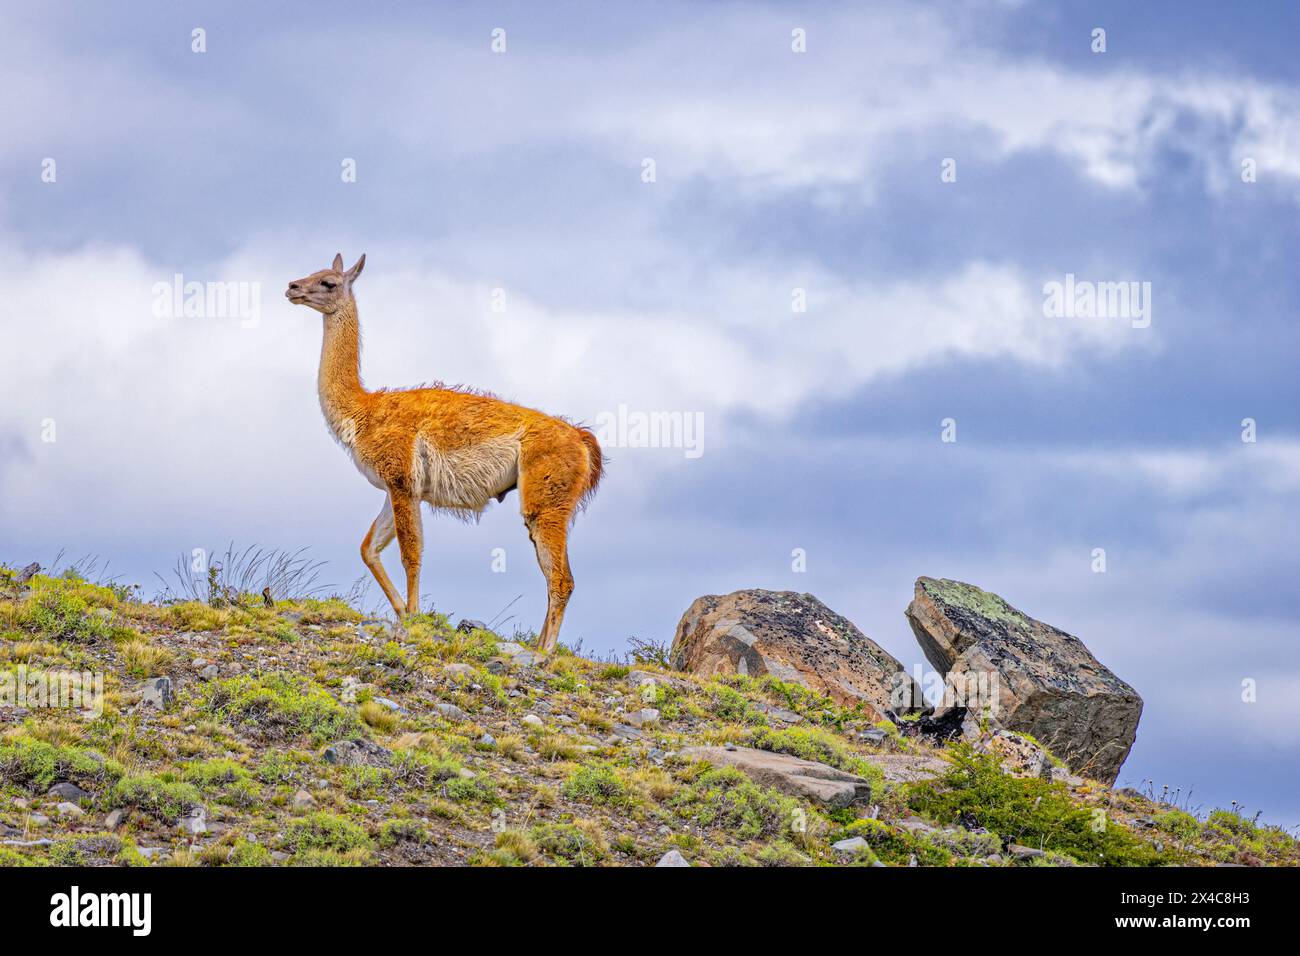 Chile, Torres del Paine National Park. Male guanaco close-up. Stock Photo